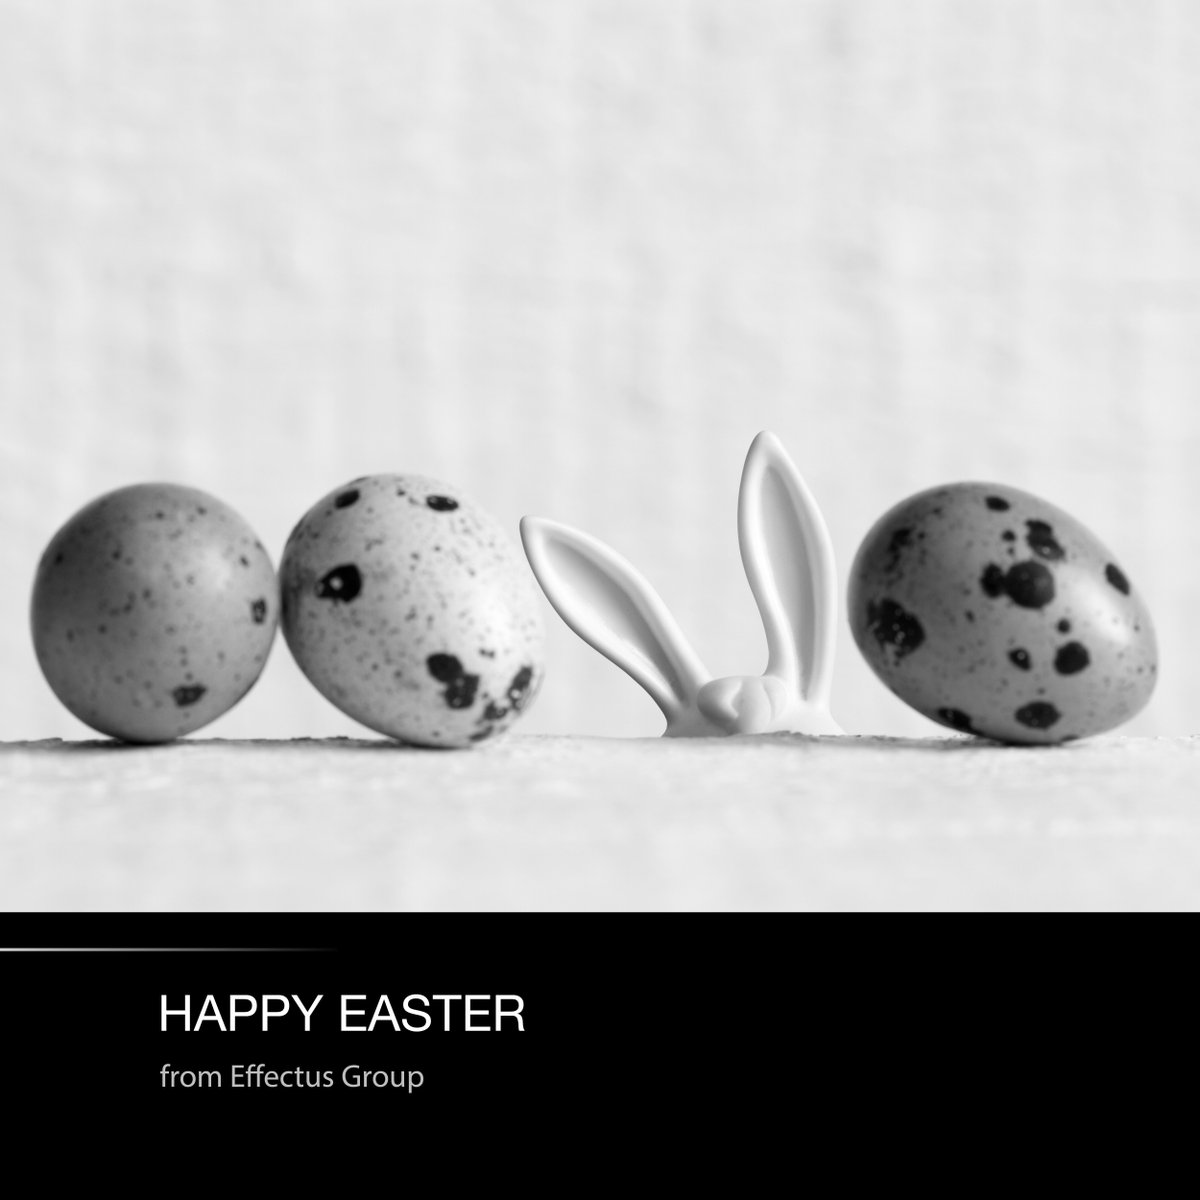 As we embrace the Easter season, we extend our warmest wishes to all our clients. 🐣🌼 

May the promise of Easter fill your life with peace, joy, and new beginnings. Happy Easter from everyone at Effectus Group! 🌸🐇💖

#HappyEaster #EasterJoy #NewBeginnings #EffectusGroup